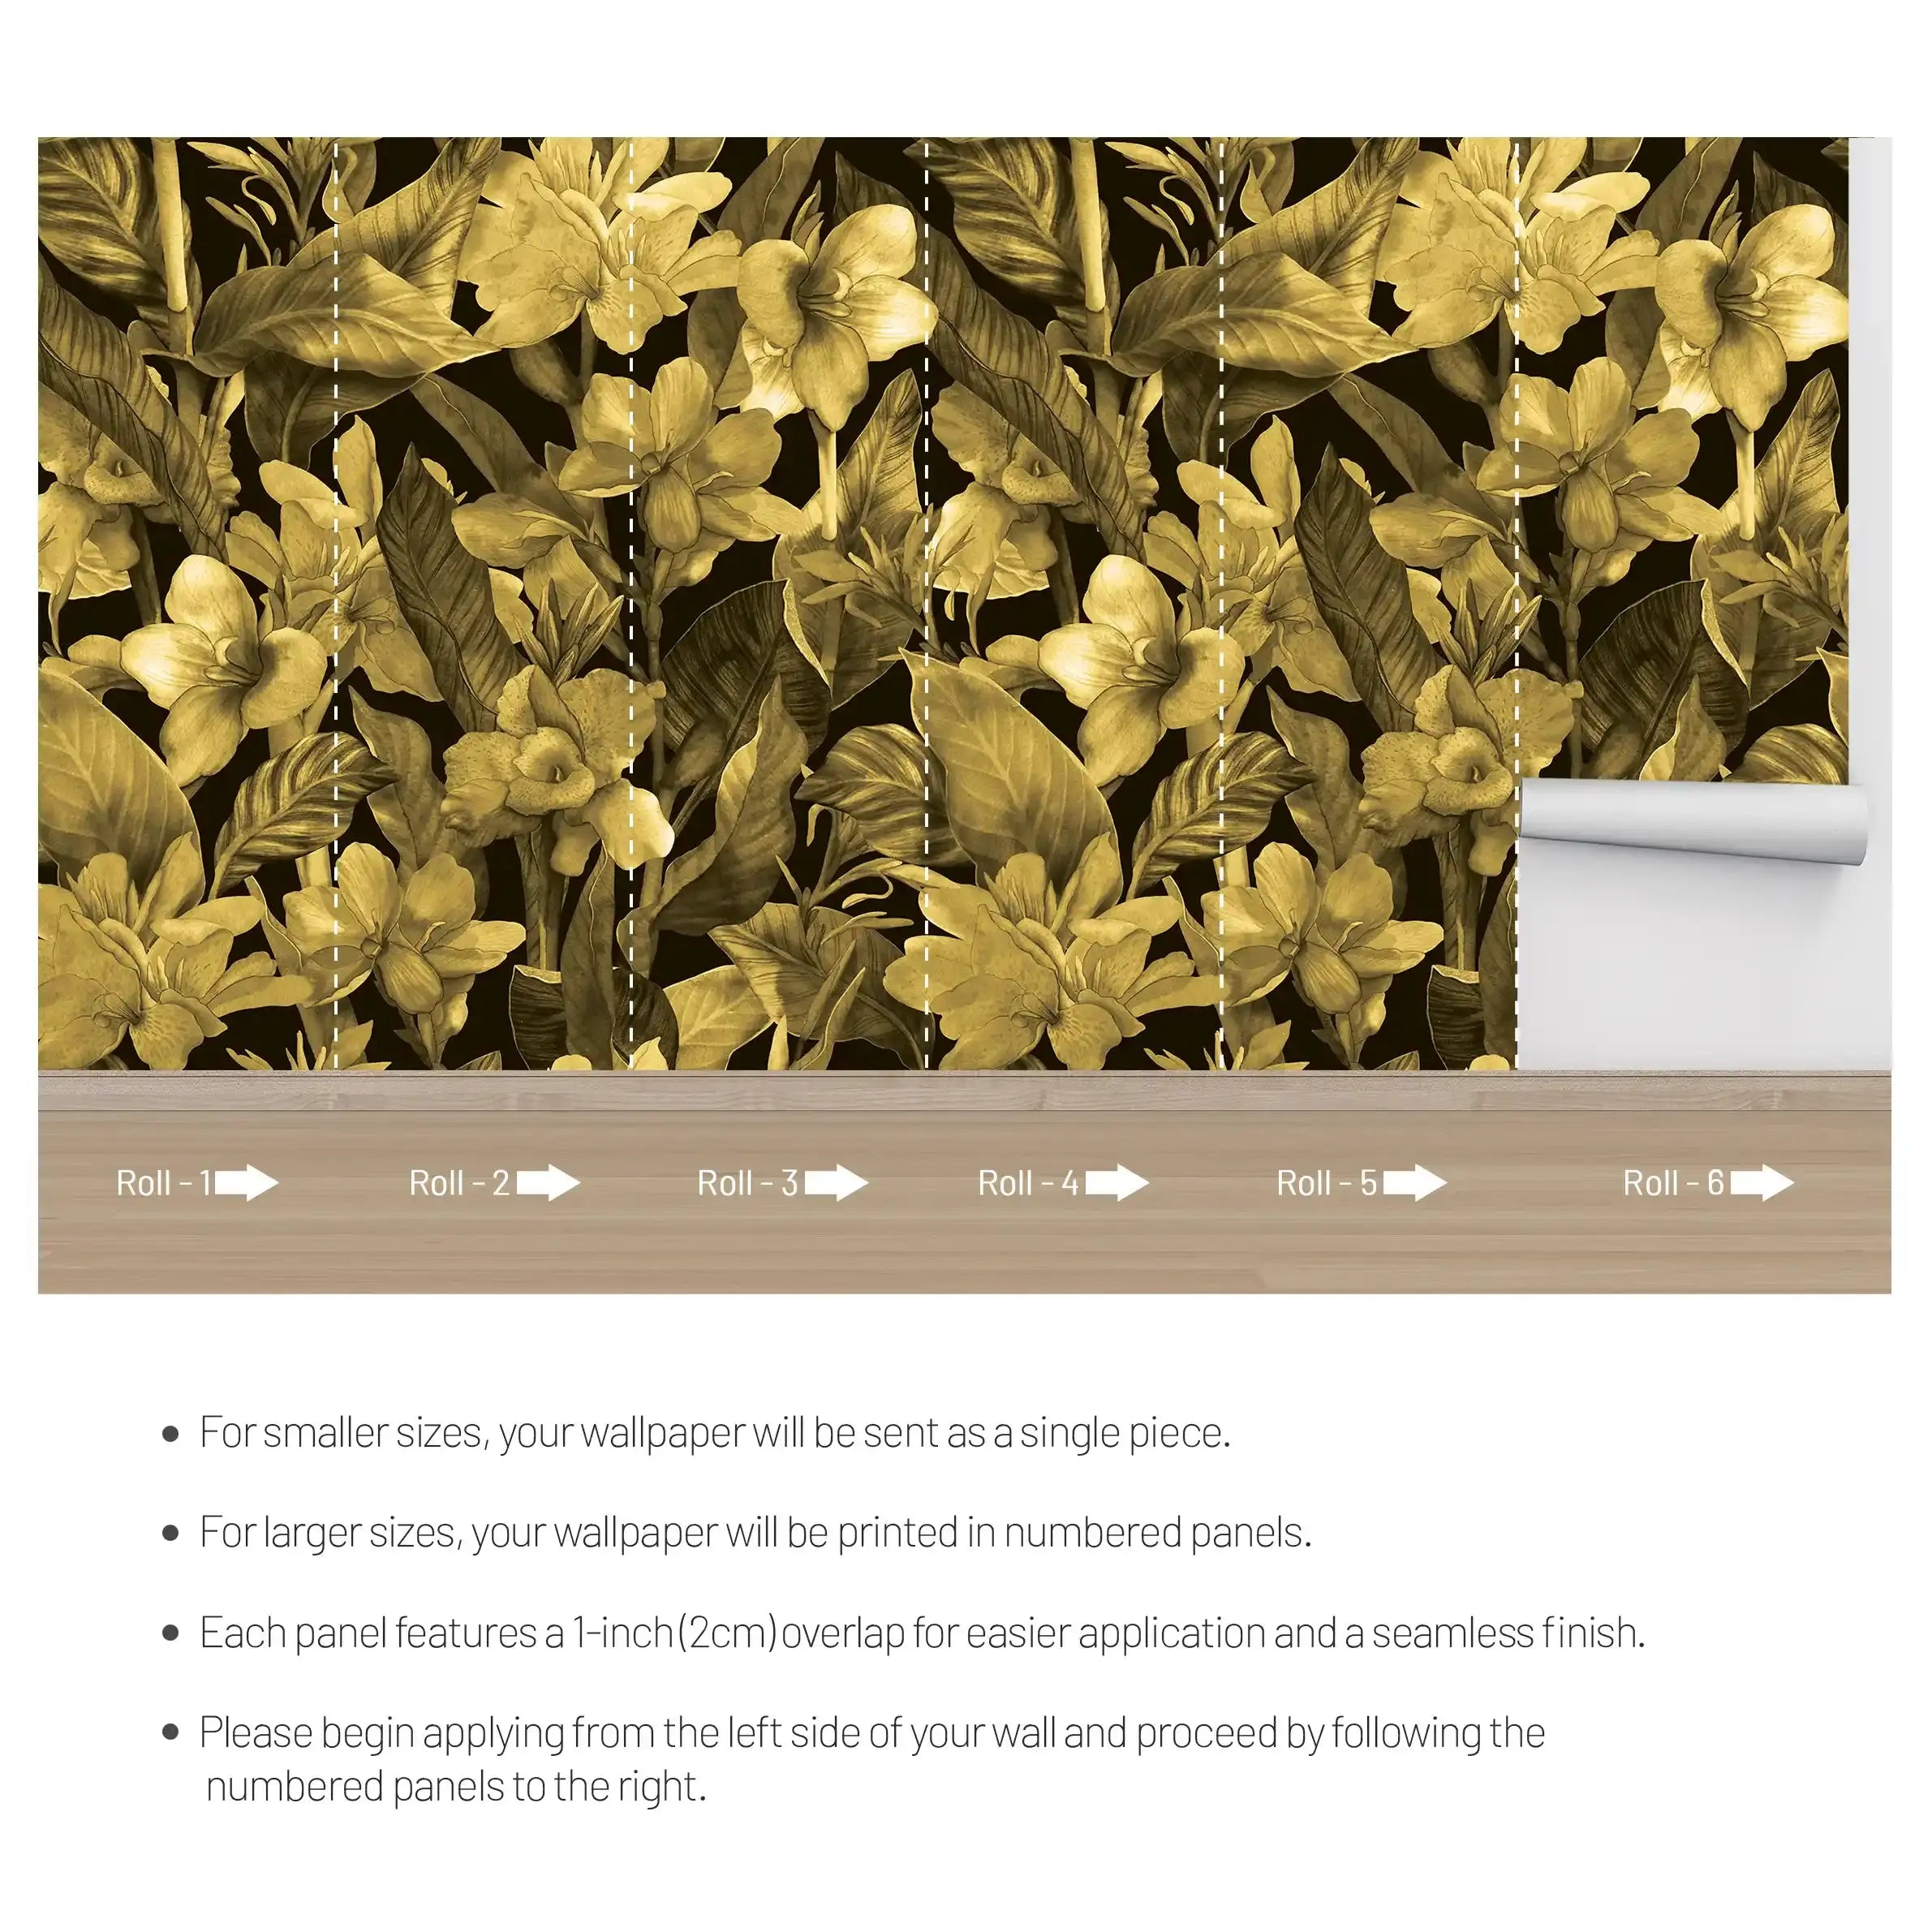 3074-A / Botanical Peel and Stick Wallpaper: Gold Floral & Black Leaf Pattern, Perfect for Accent Wall Decor - Artevella